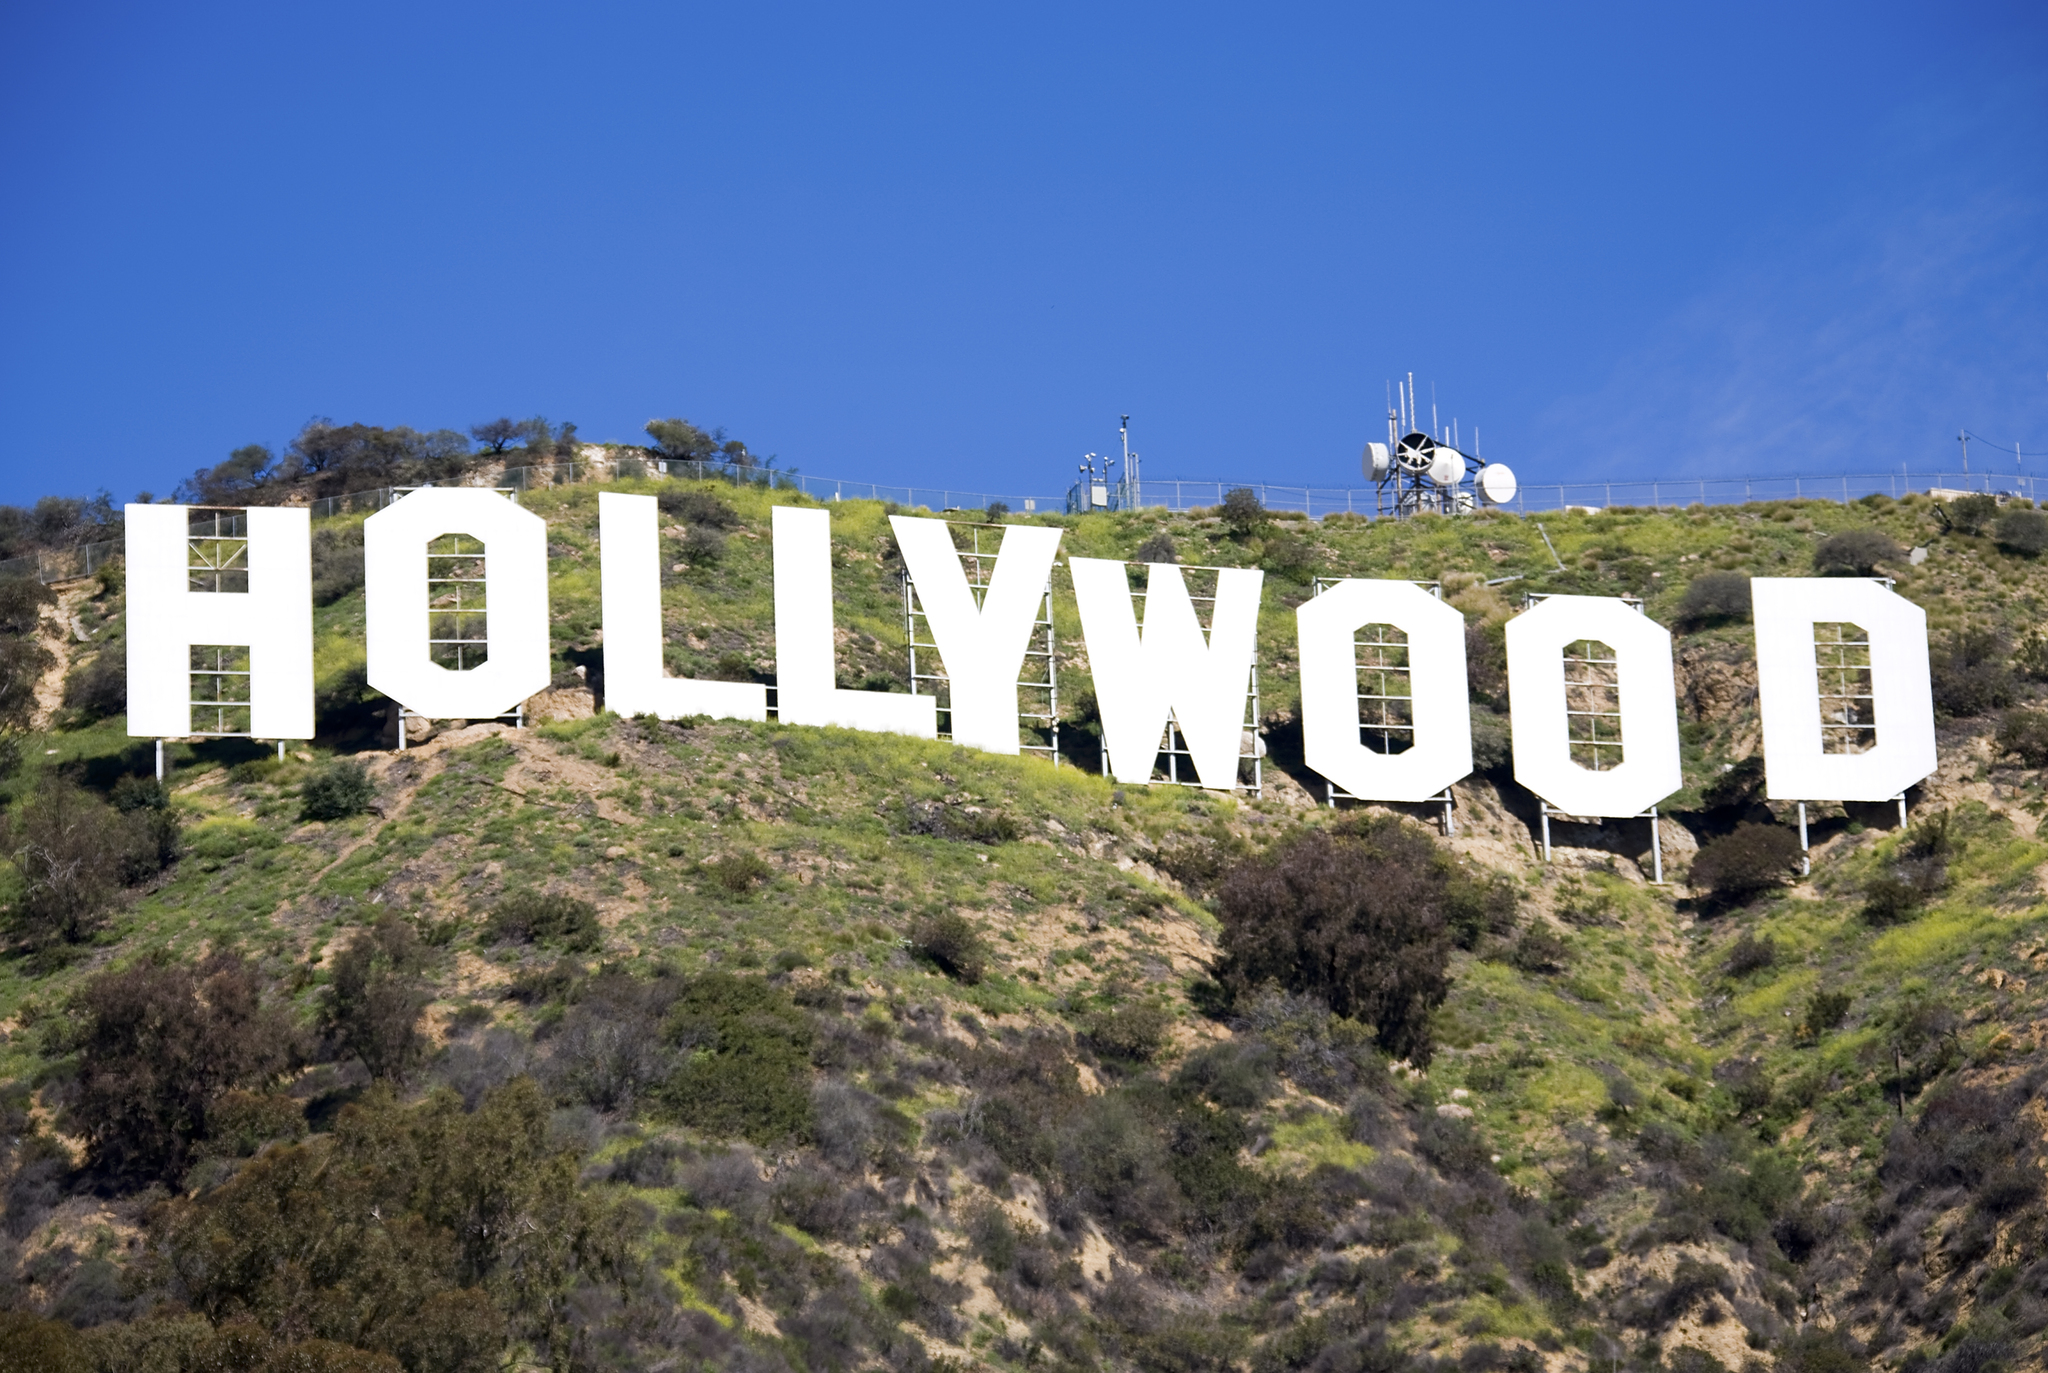 Discover the many ways you can celebrate 100 years of the Hollywood sign in L.A.